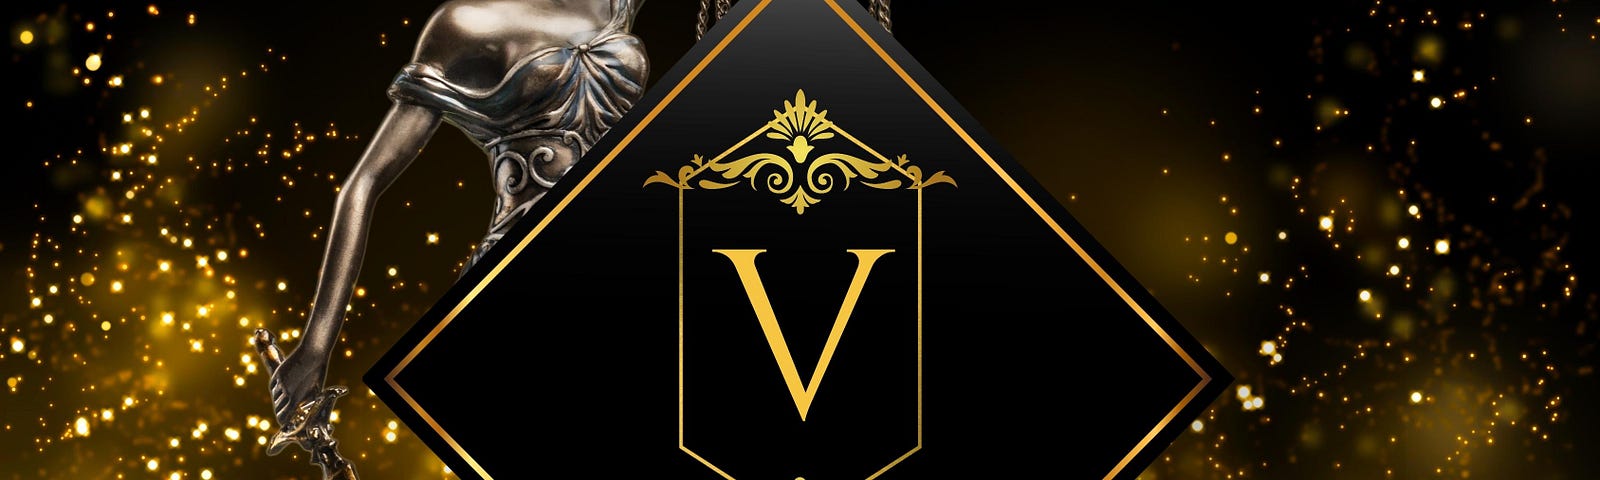 the black and gold logo of the veritas 7 — true crime podcast